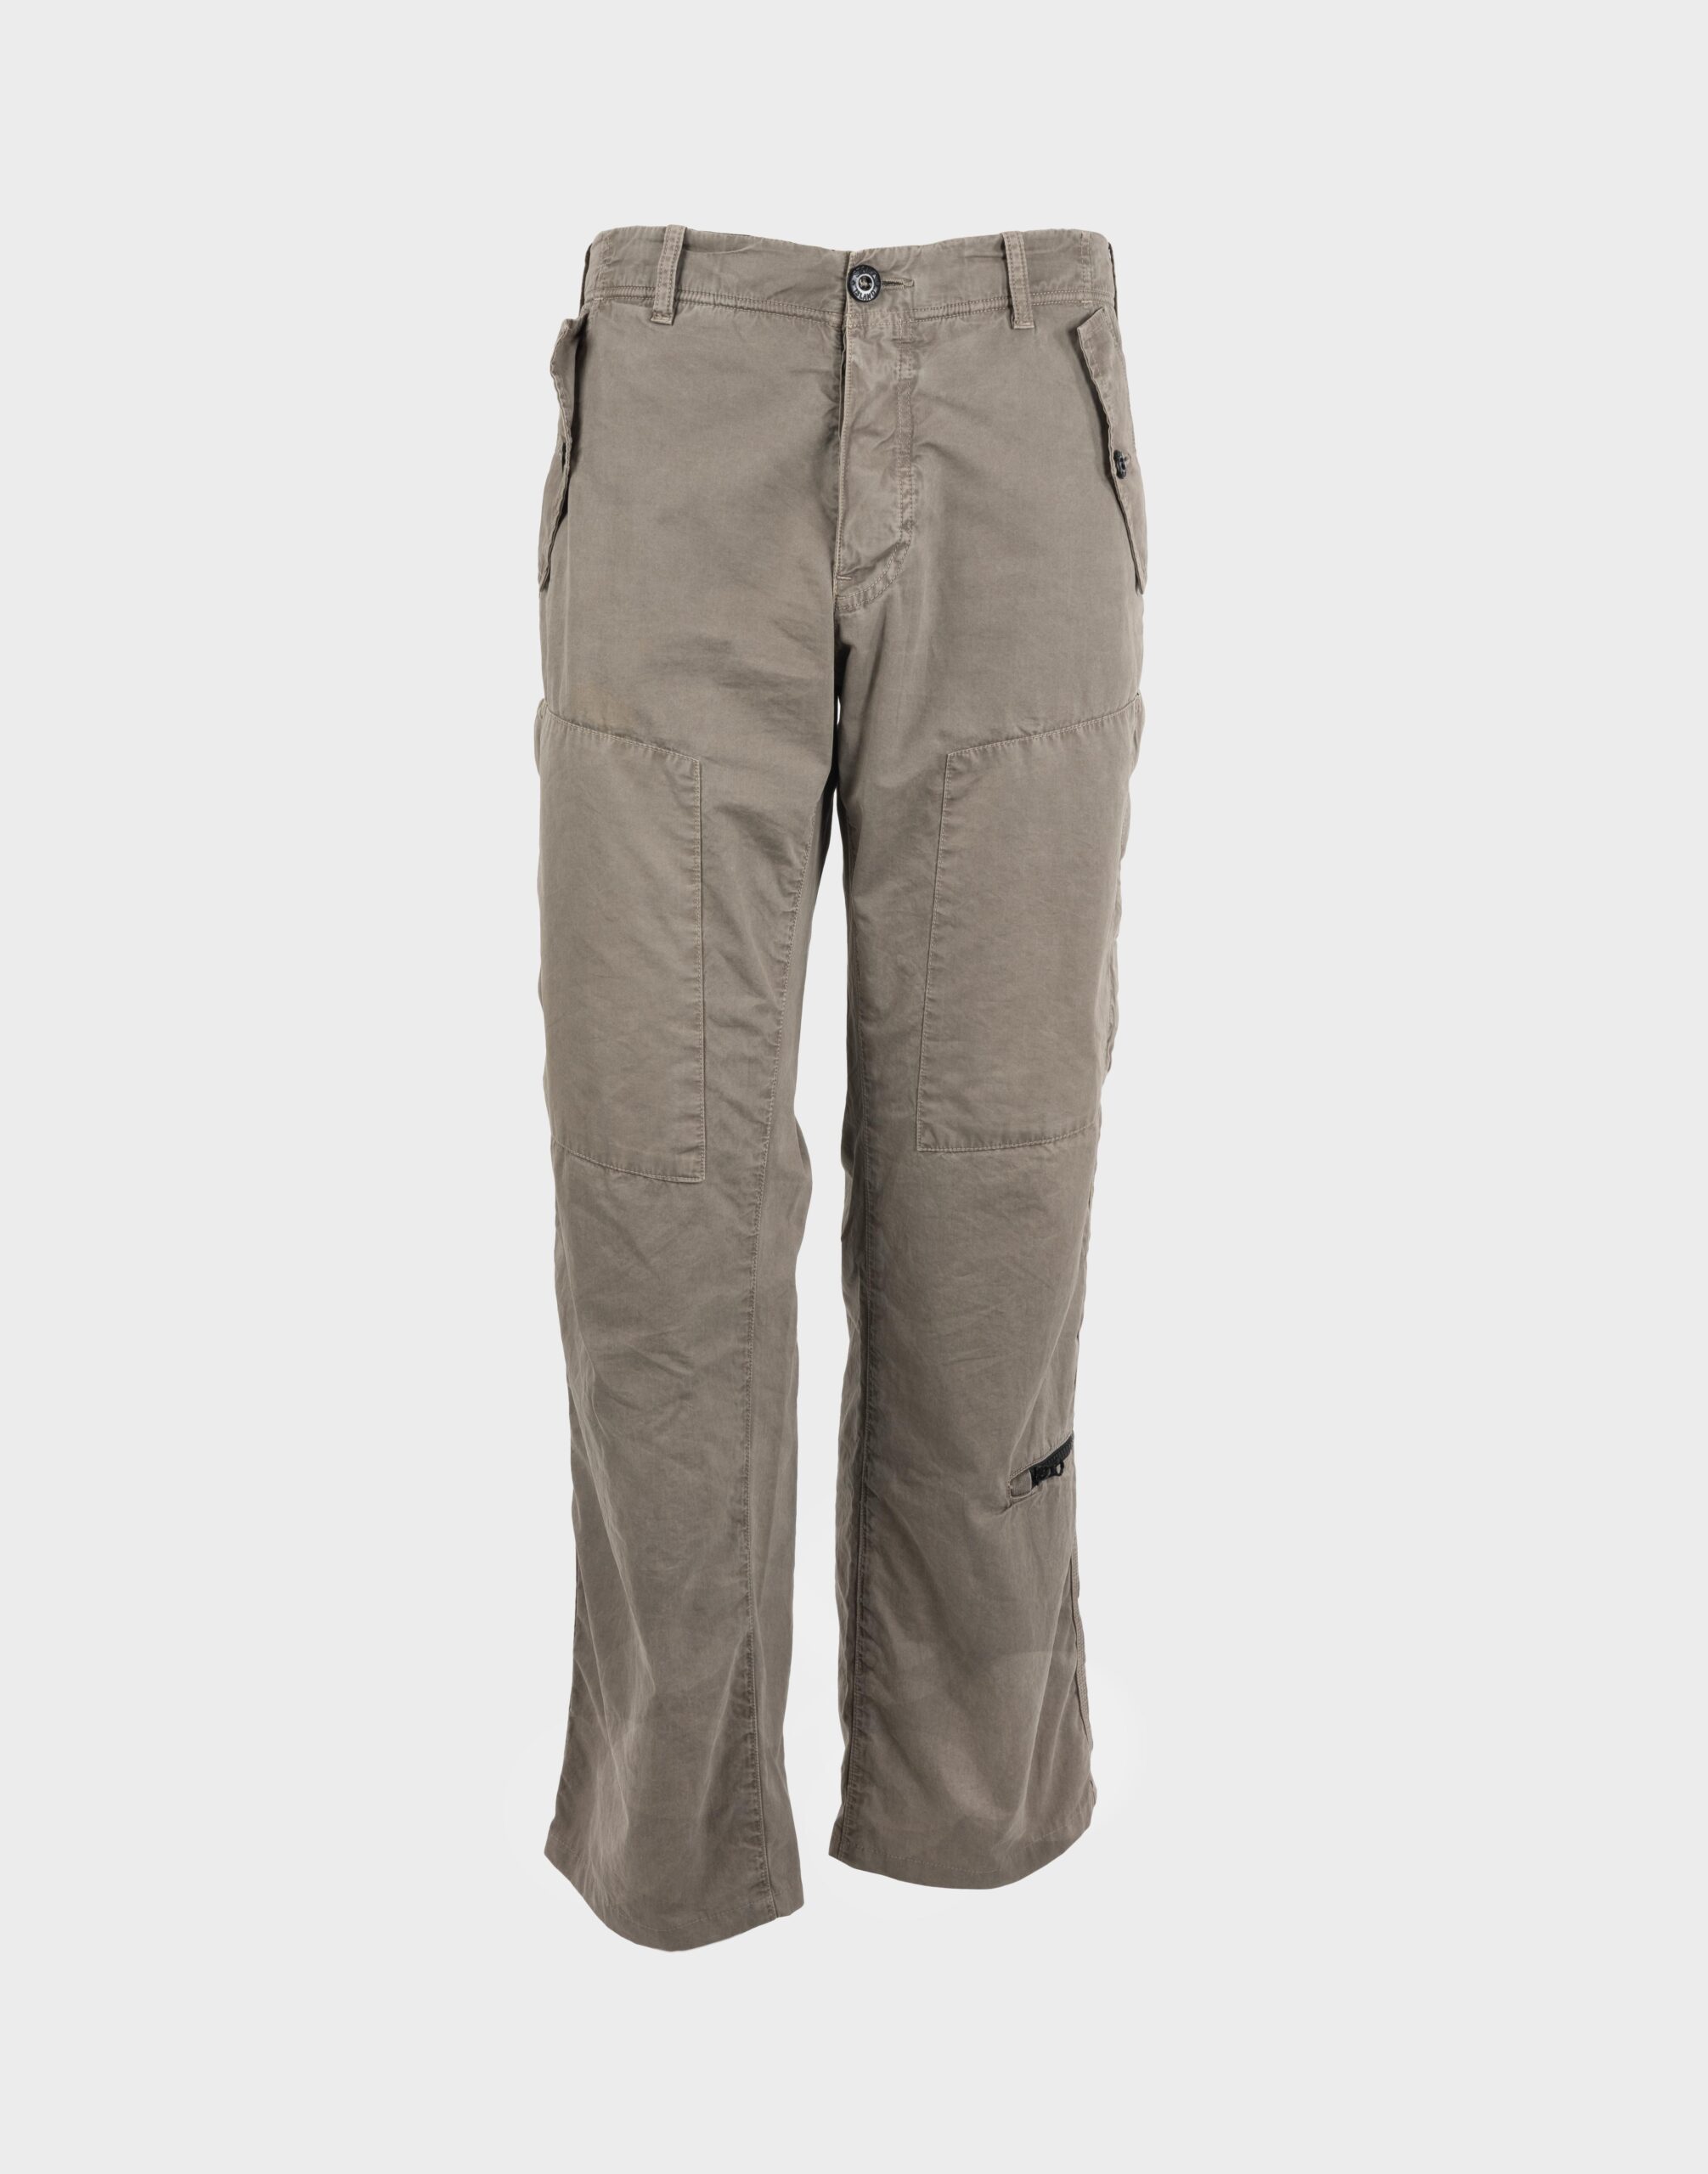 Beige cotton cargo pants by Stone Island, photographed on a mannequin and isolated with a gray background